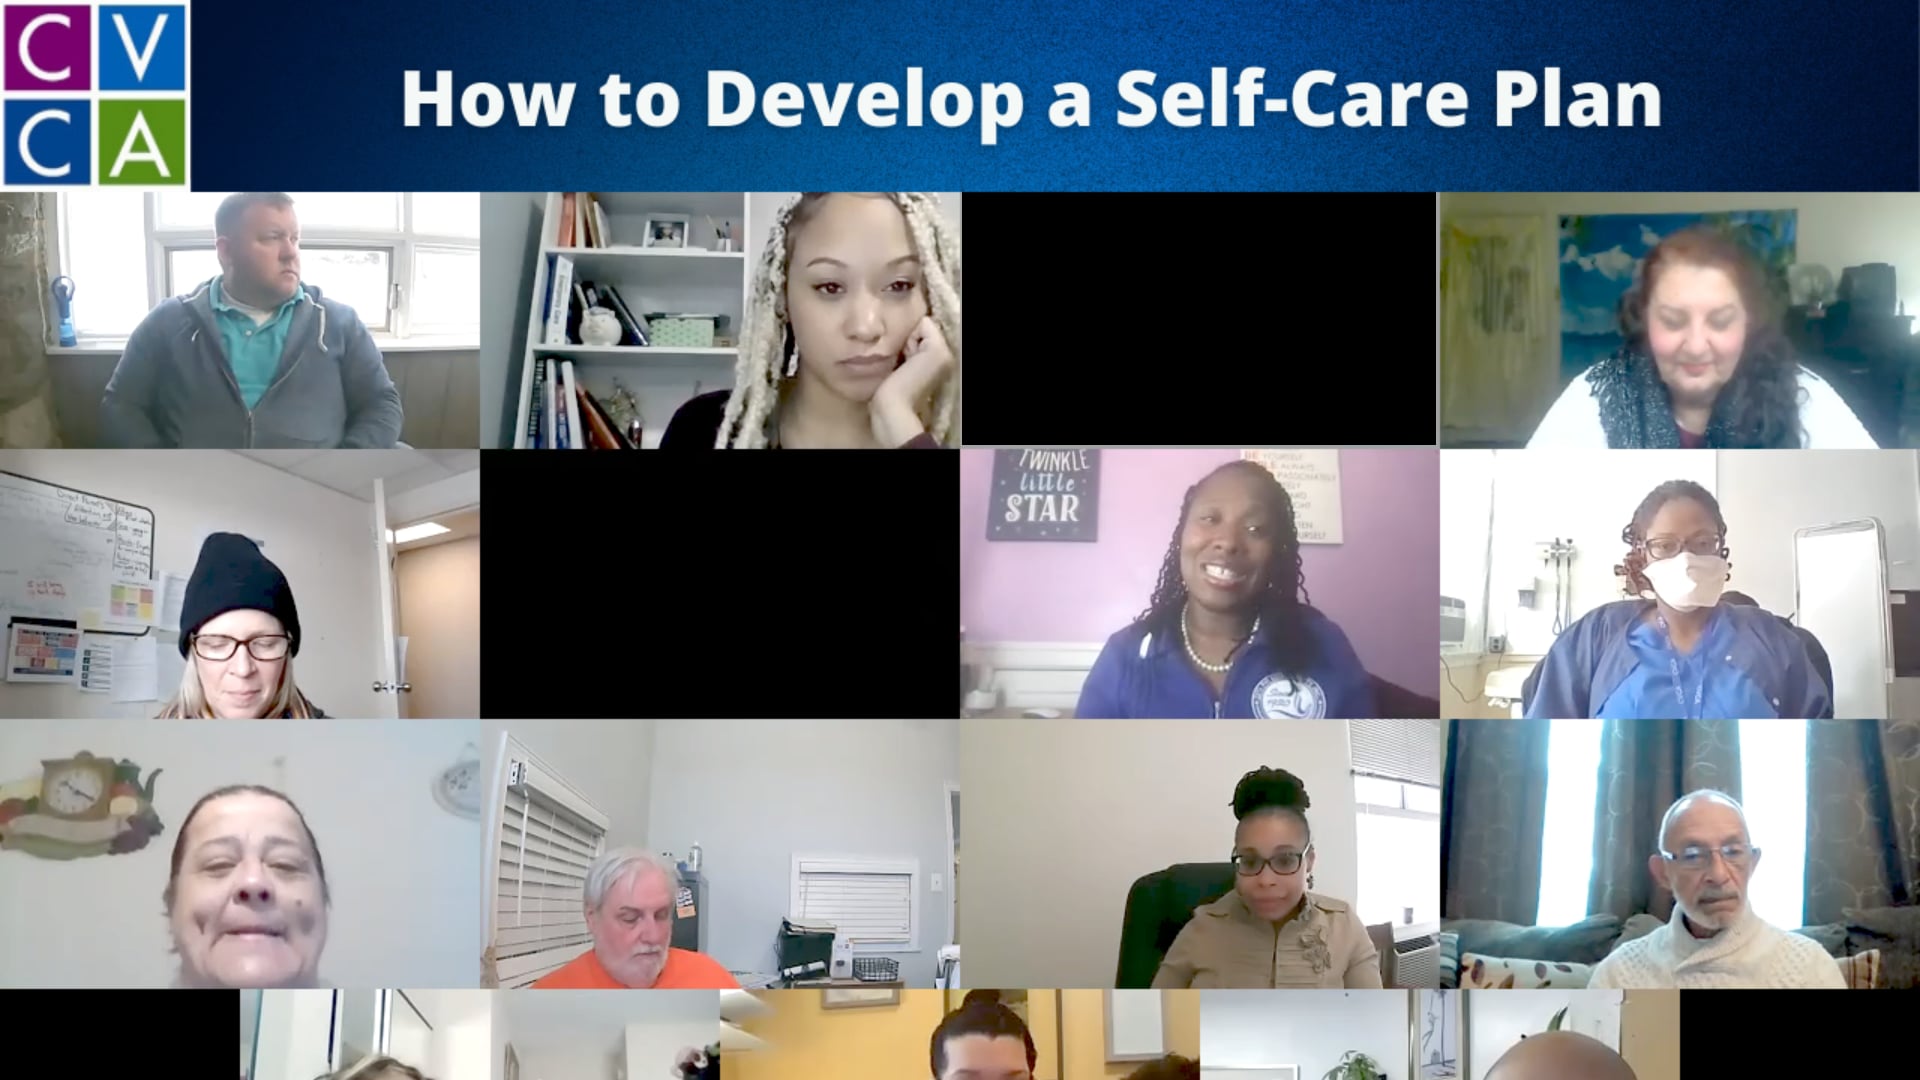 How to Develop a Self-Care Plan